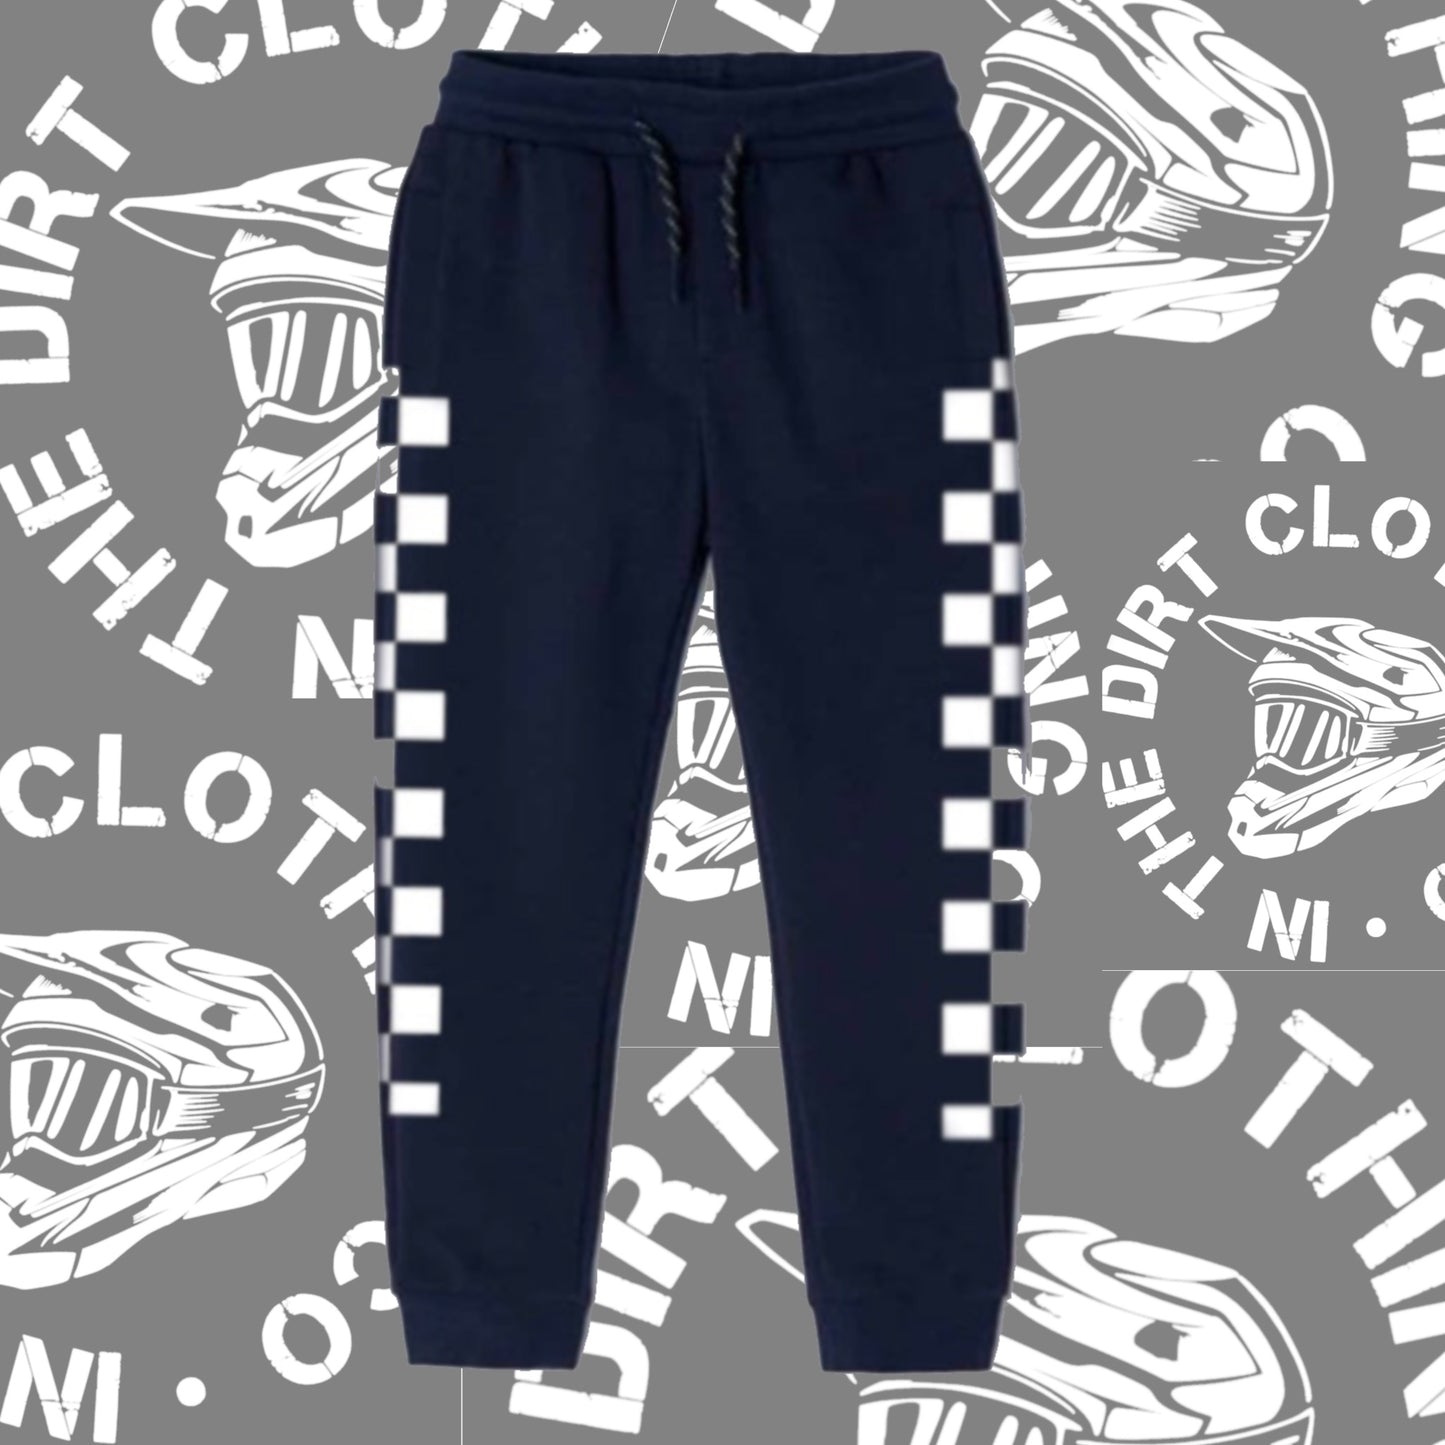 Checkered joggers